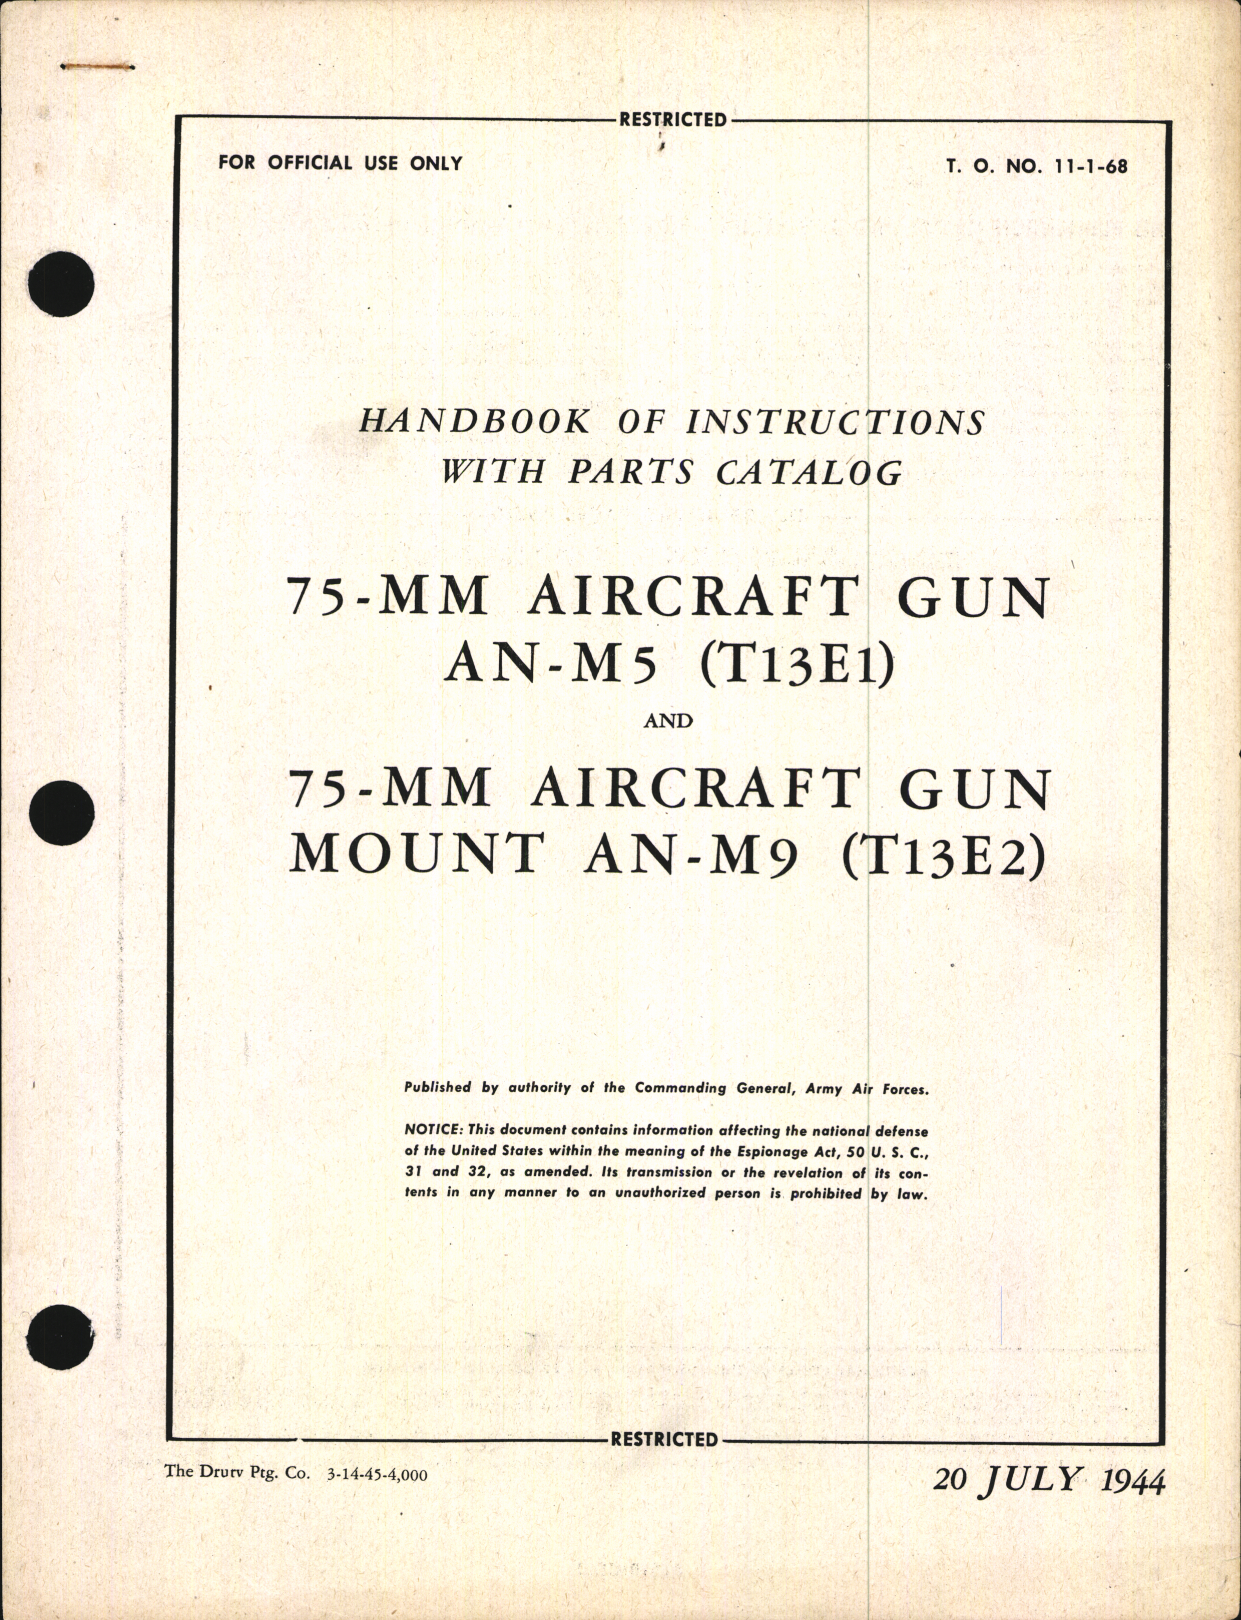 Sample page 1 from AirCorps Library document: Handbook of Instructions with Parts Catalog for 75-MM Aircraft Gun, AN-M5 (T13E1) and AN-M9 (T13E2)